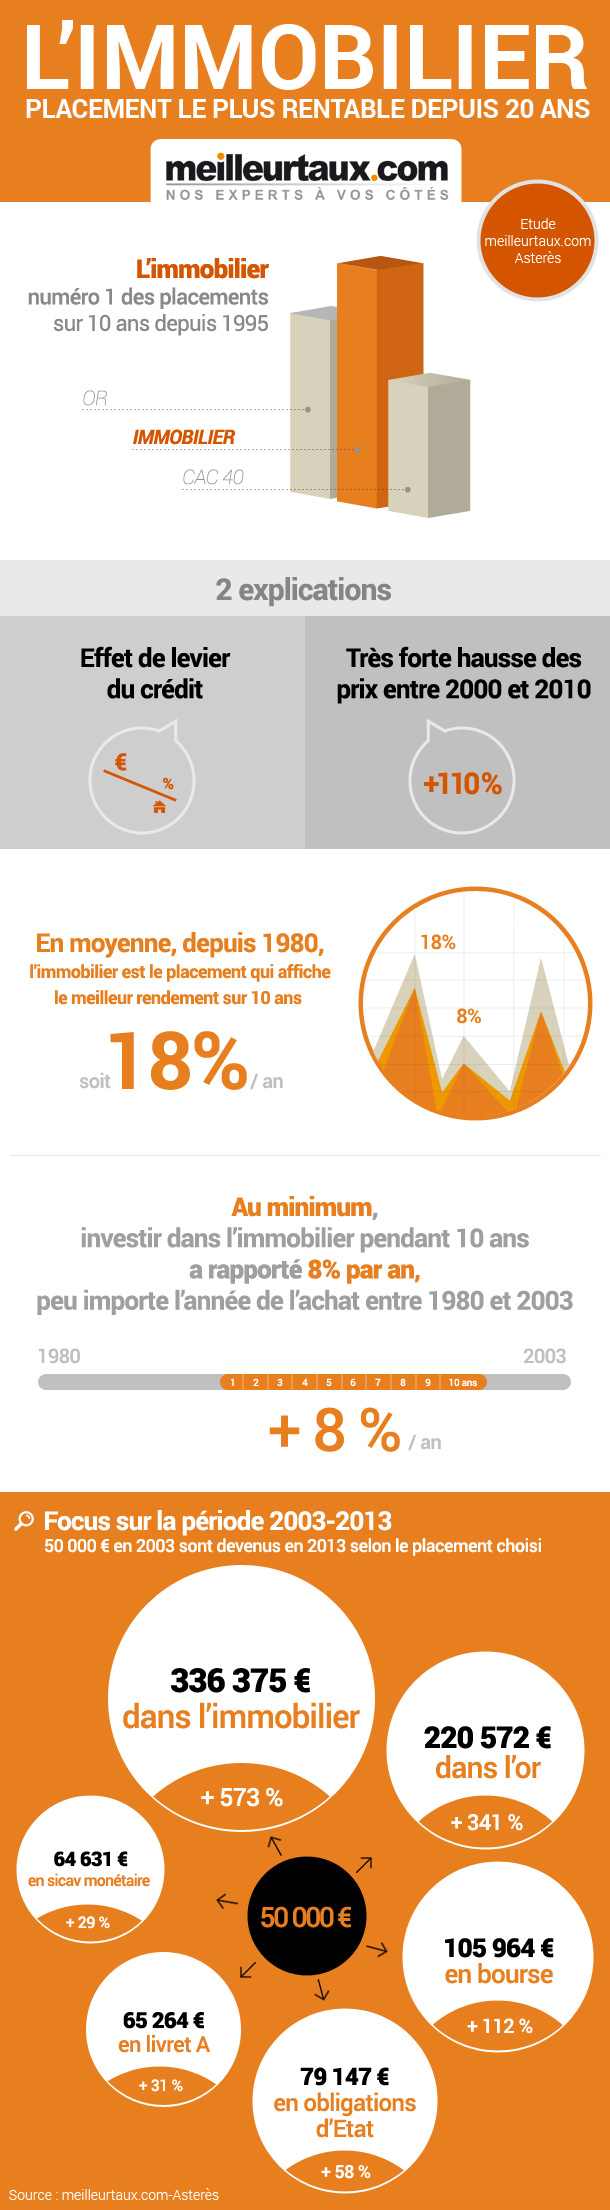 infographie-placement